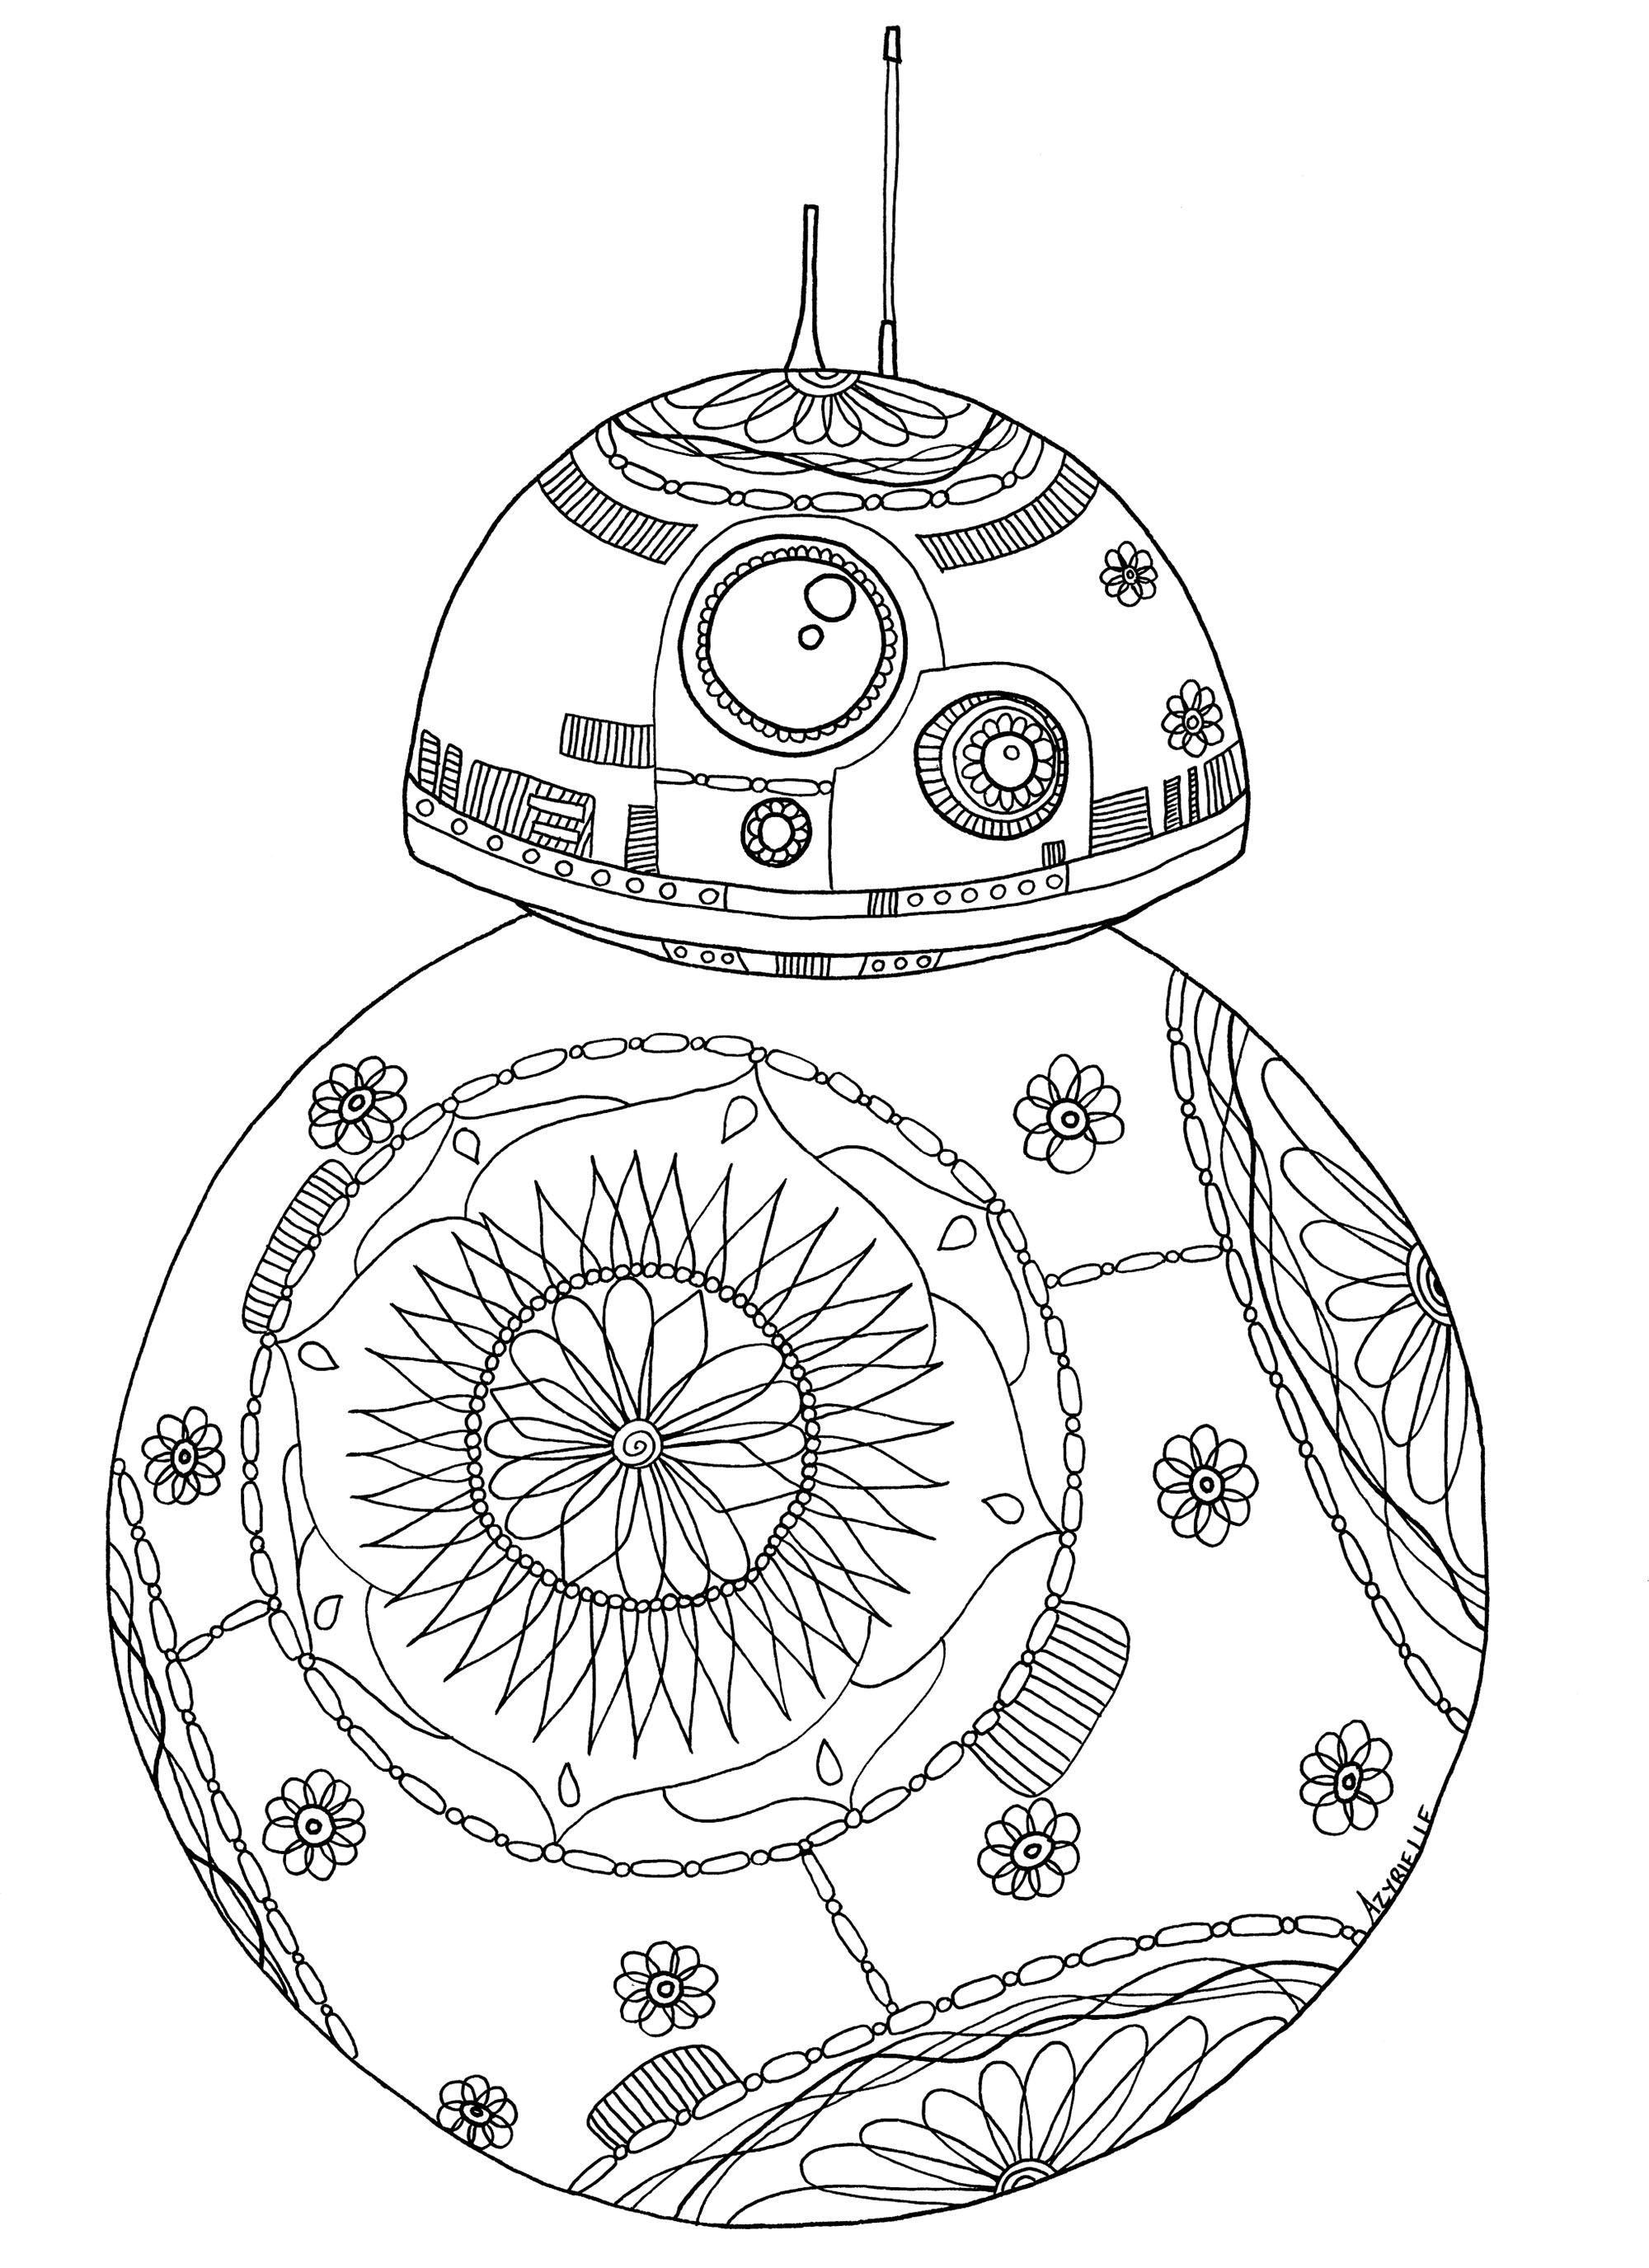 10 Best Coloring Pages for Adults Star Wars Best